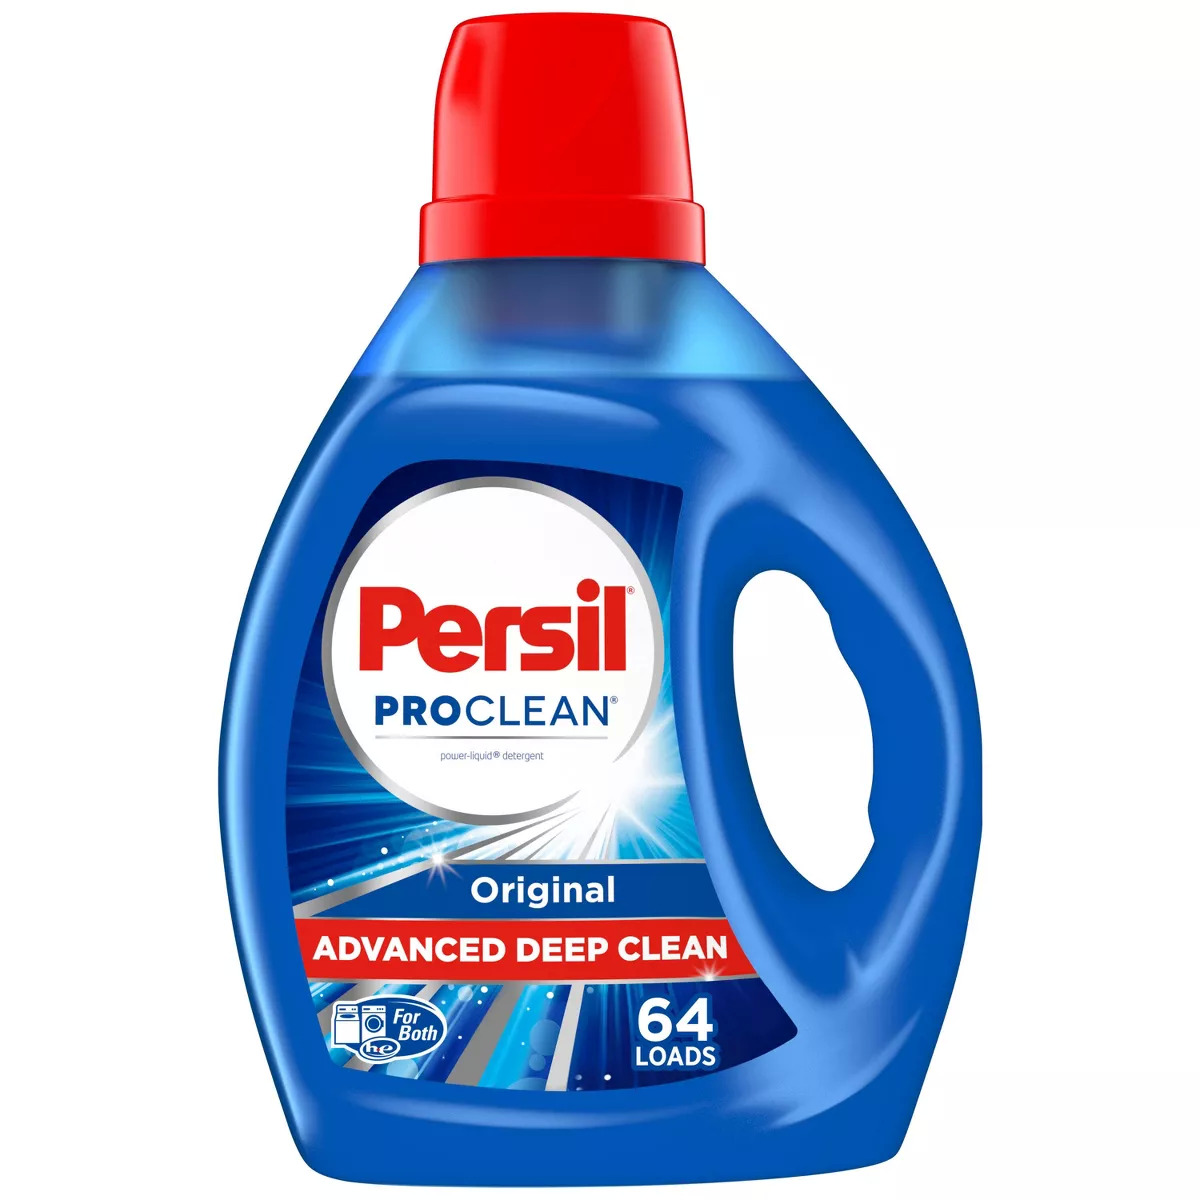 Persil Laundry Detergent 100 fl oz - $9.99 with Target Circle Deal